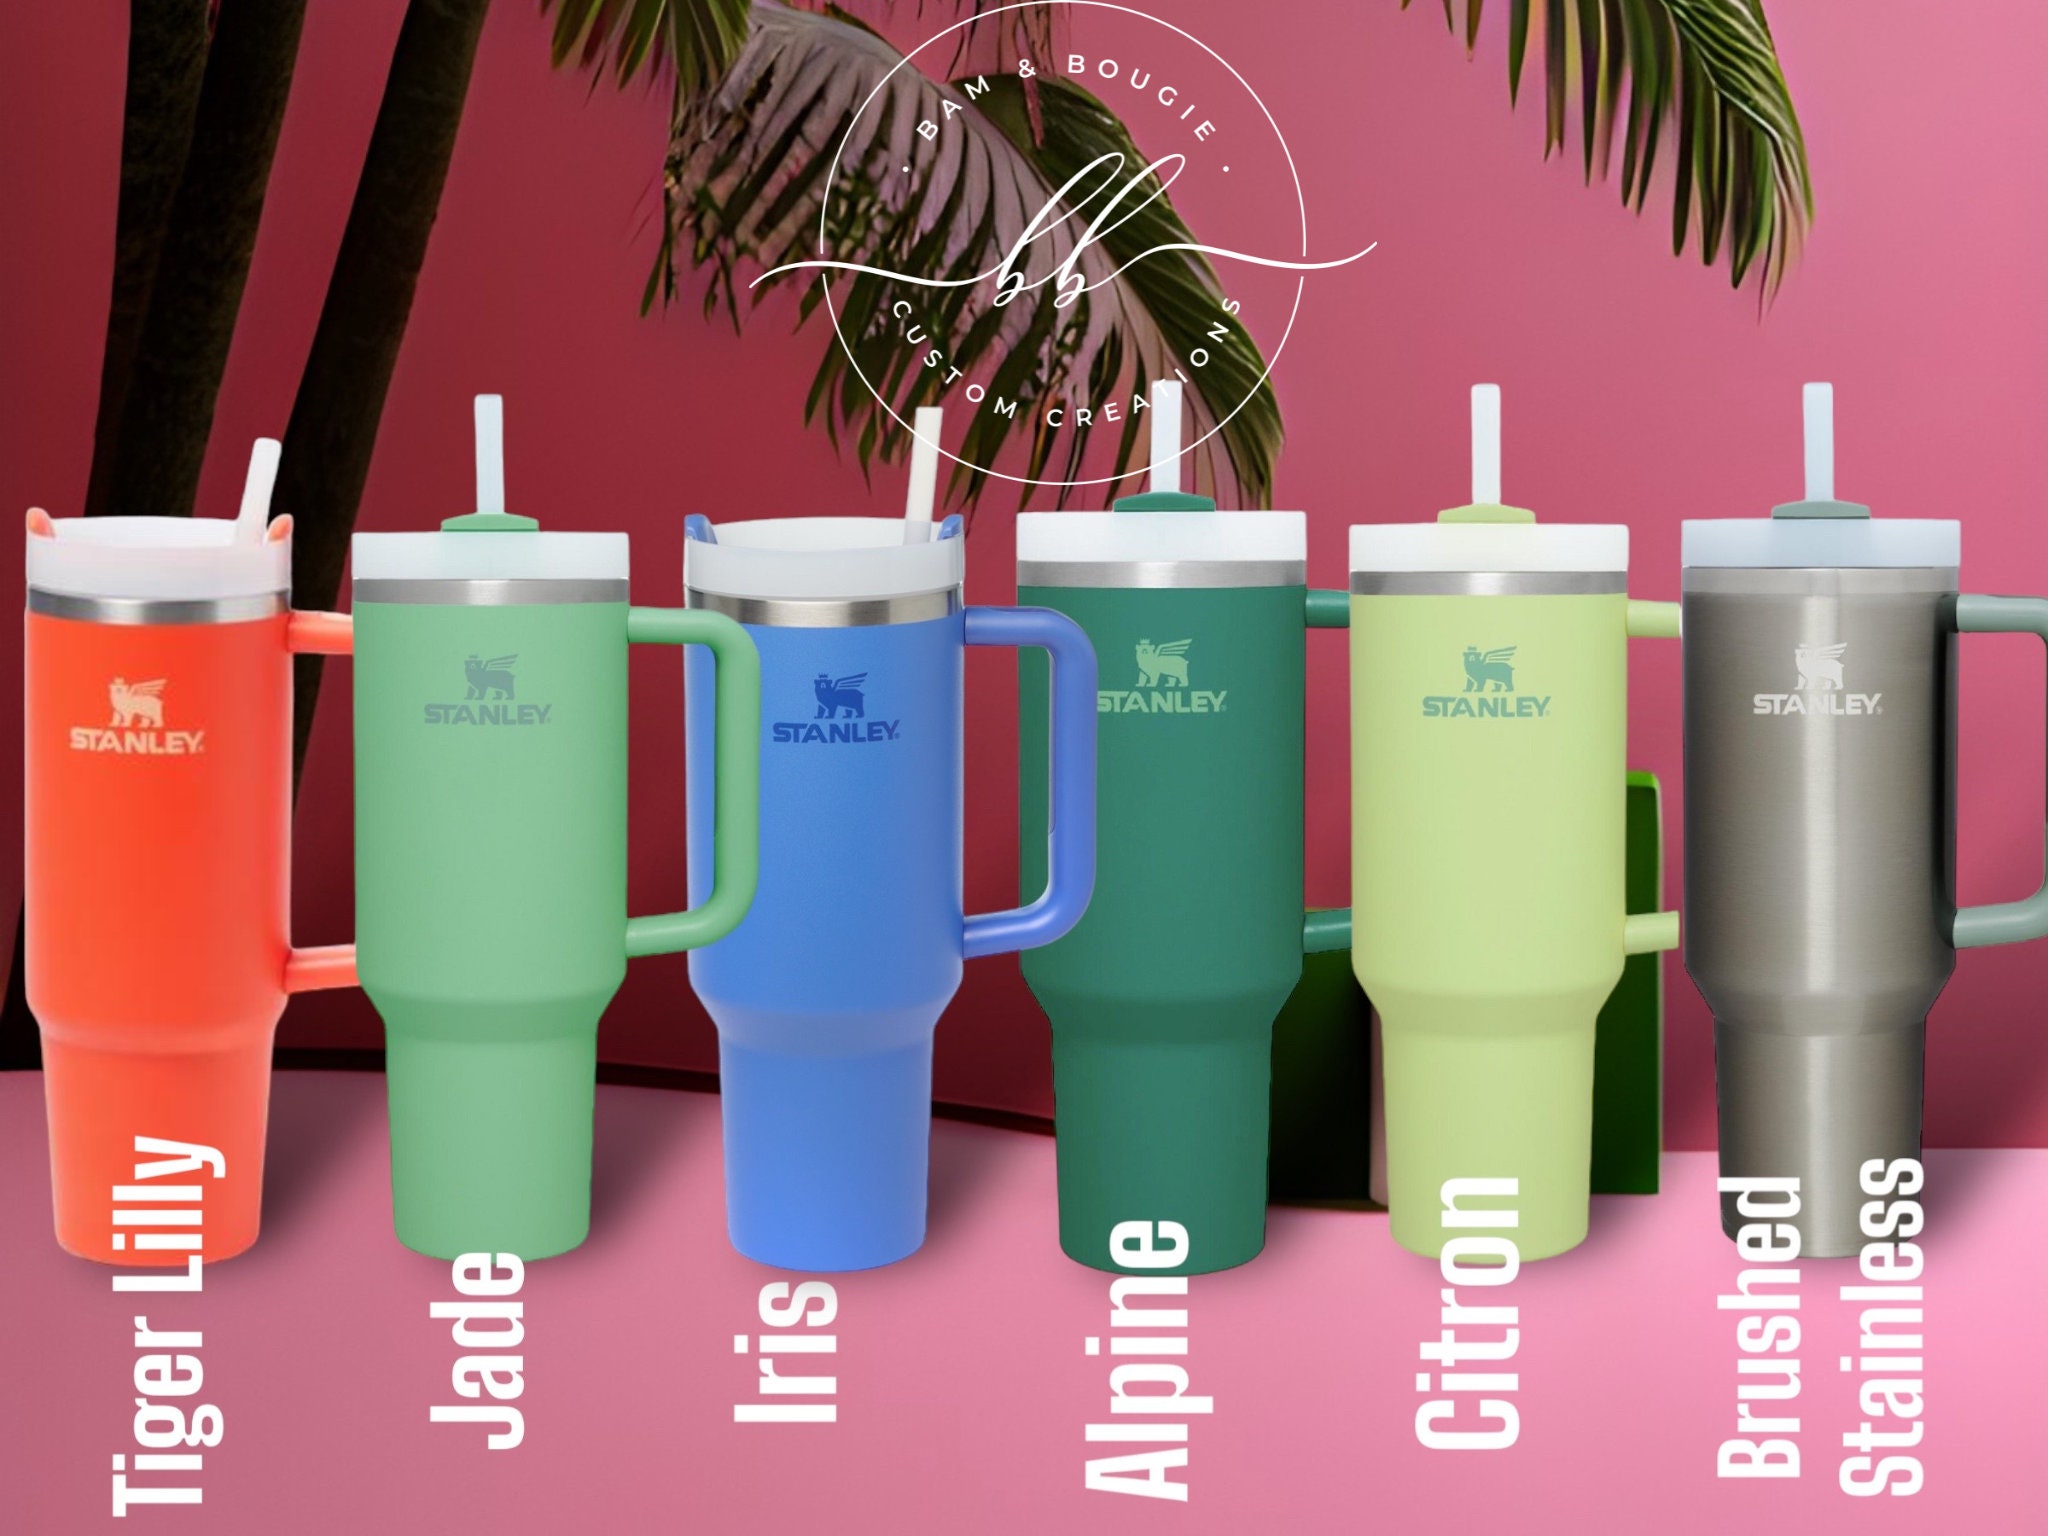 Bring nature wherever you go with new Alpine (in 40 oz) and Iris (avai, Stanley  Tumblers